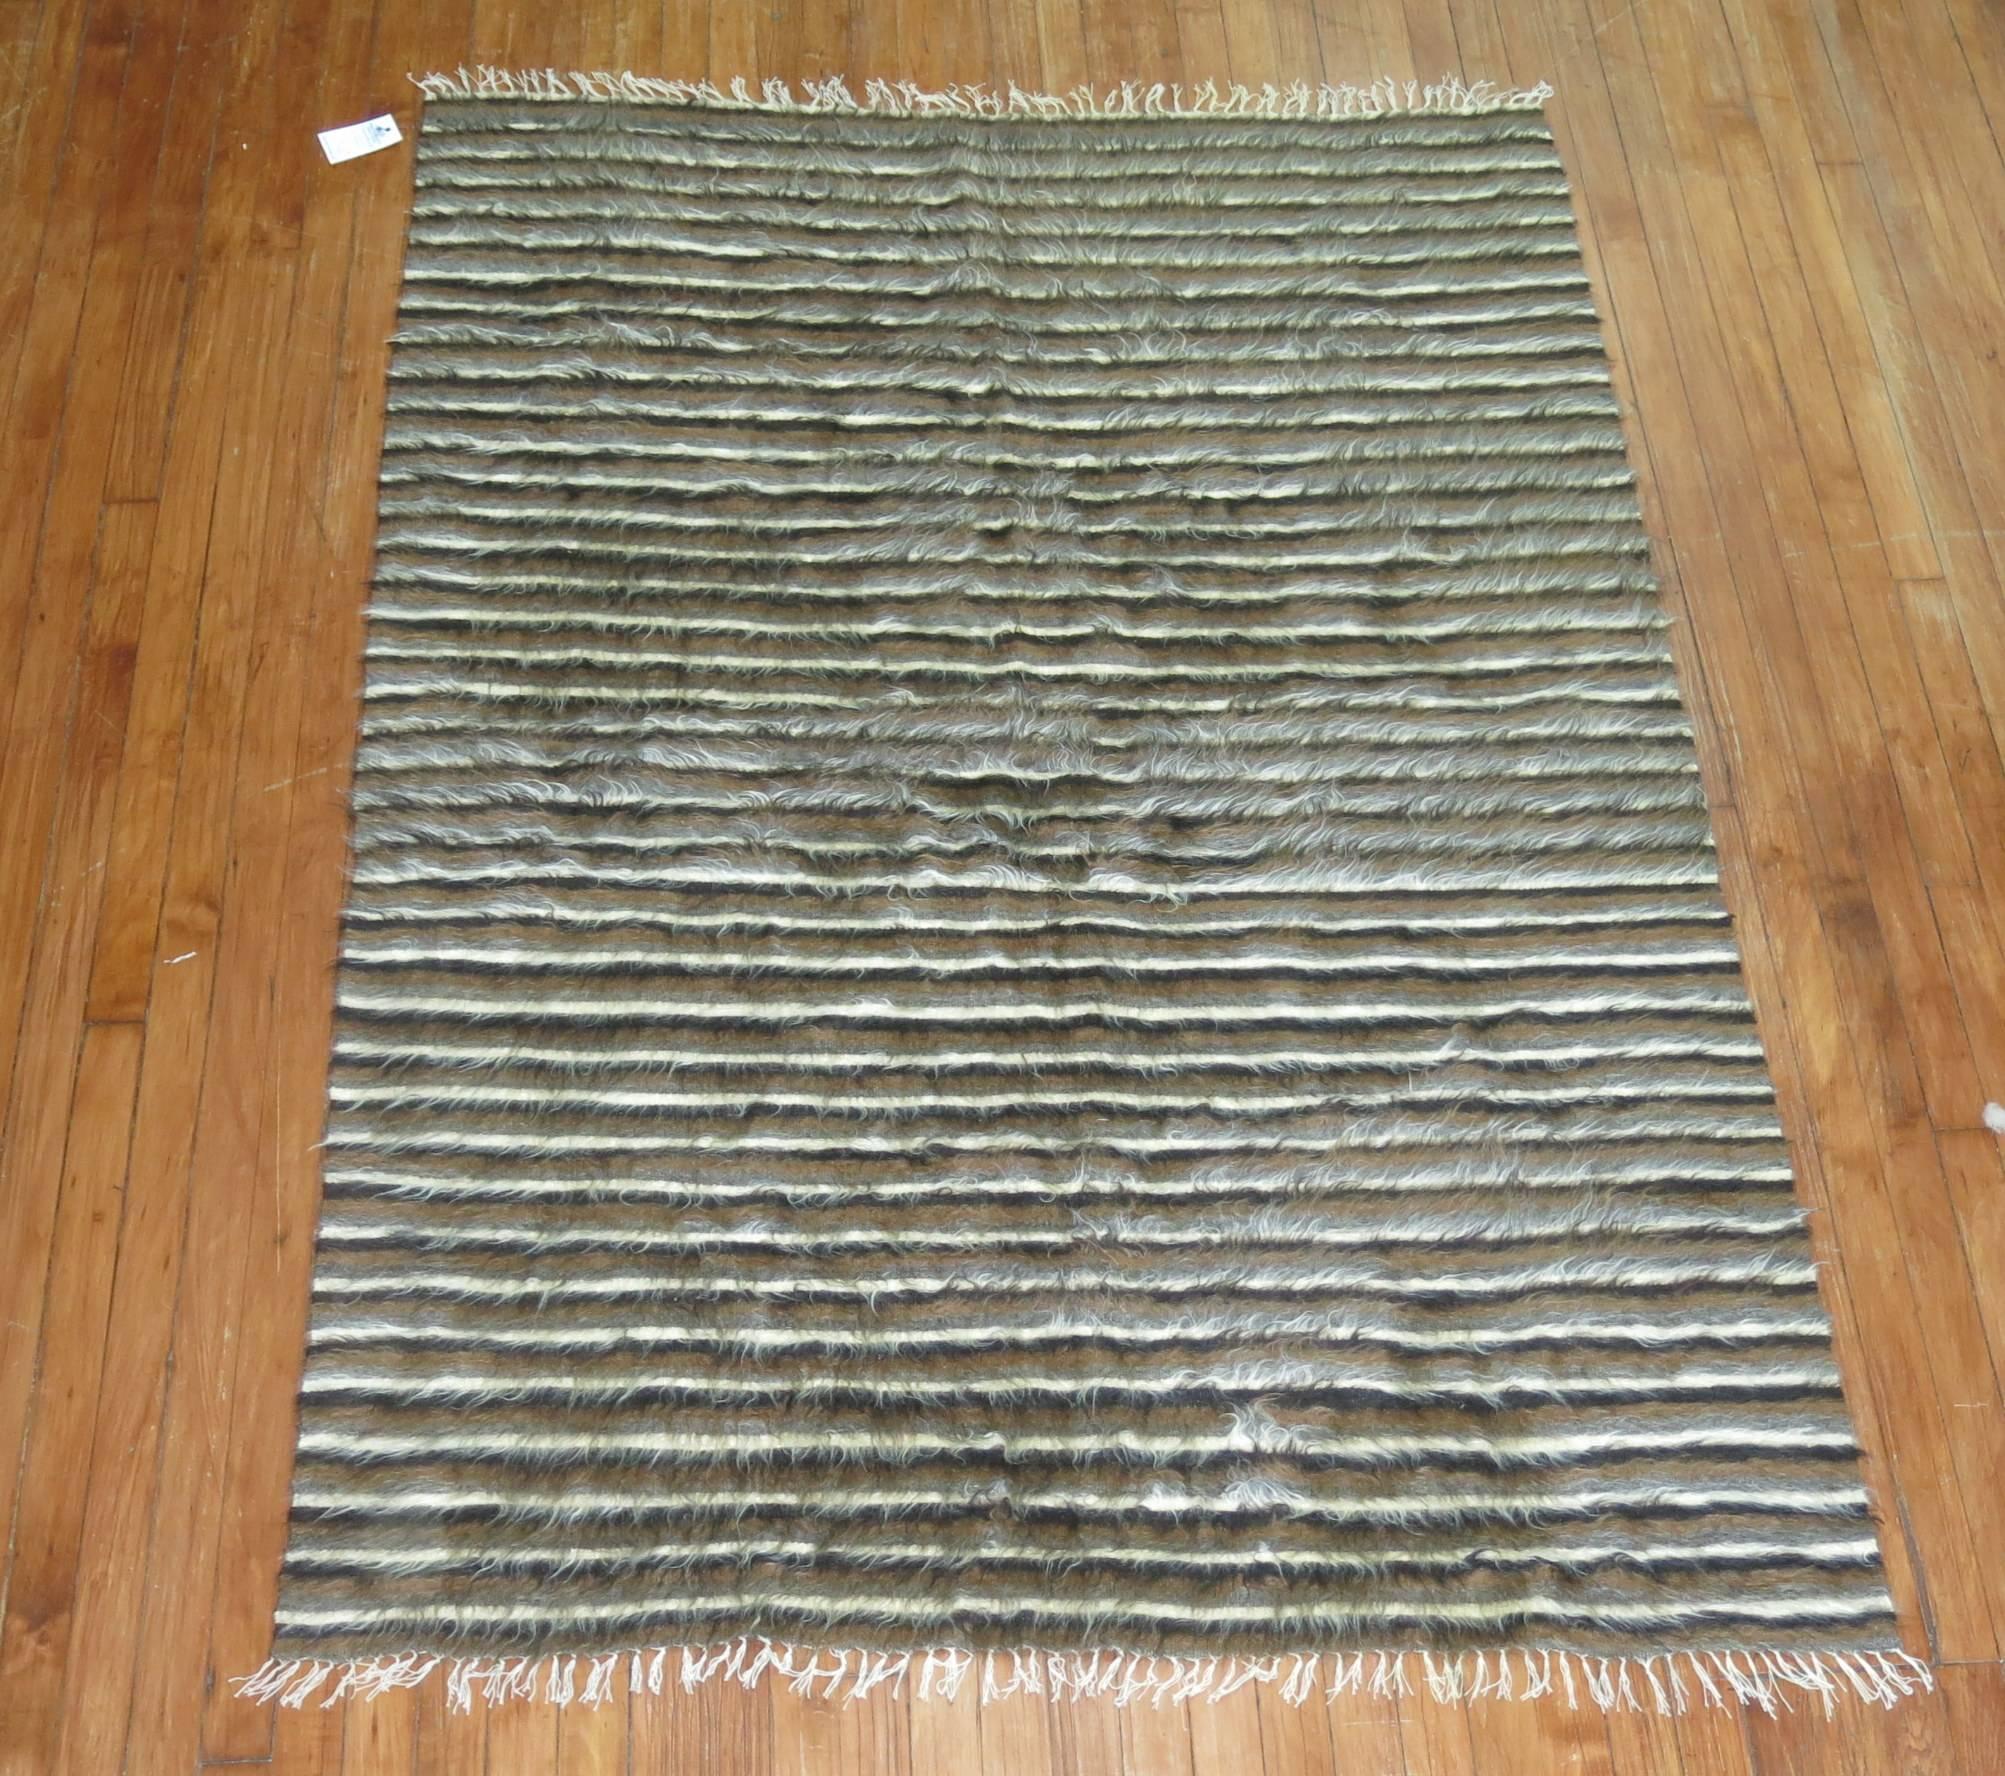 Vintage Mohair rug with a striped design in brown, black, gray.